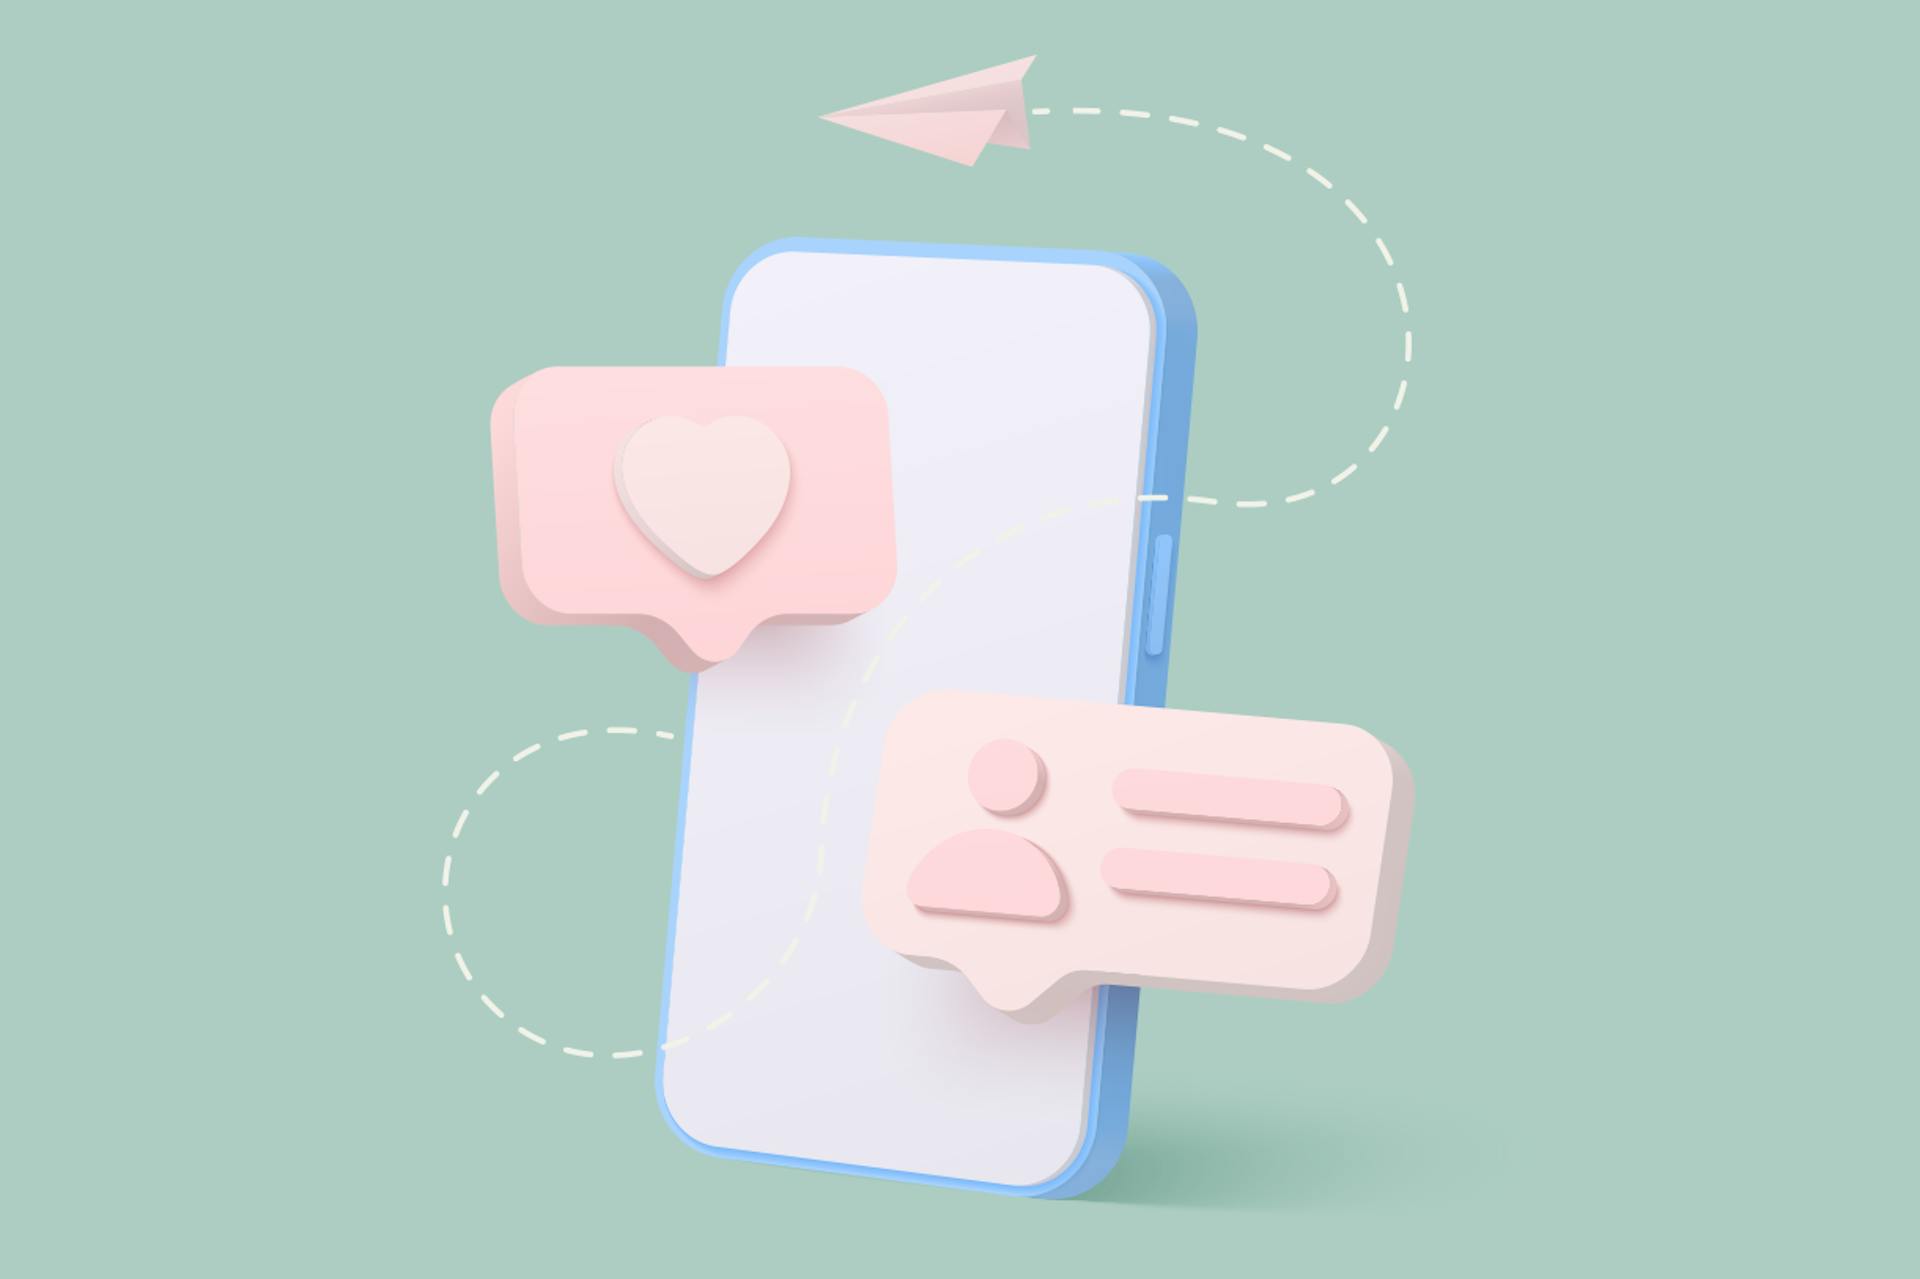 Illustration of a phone on a light green background with like, comment, and email symbols. Finding the best influencers blog post